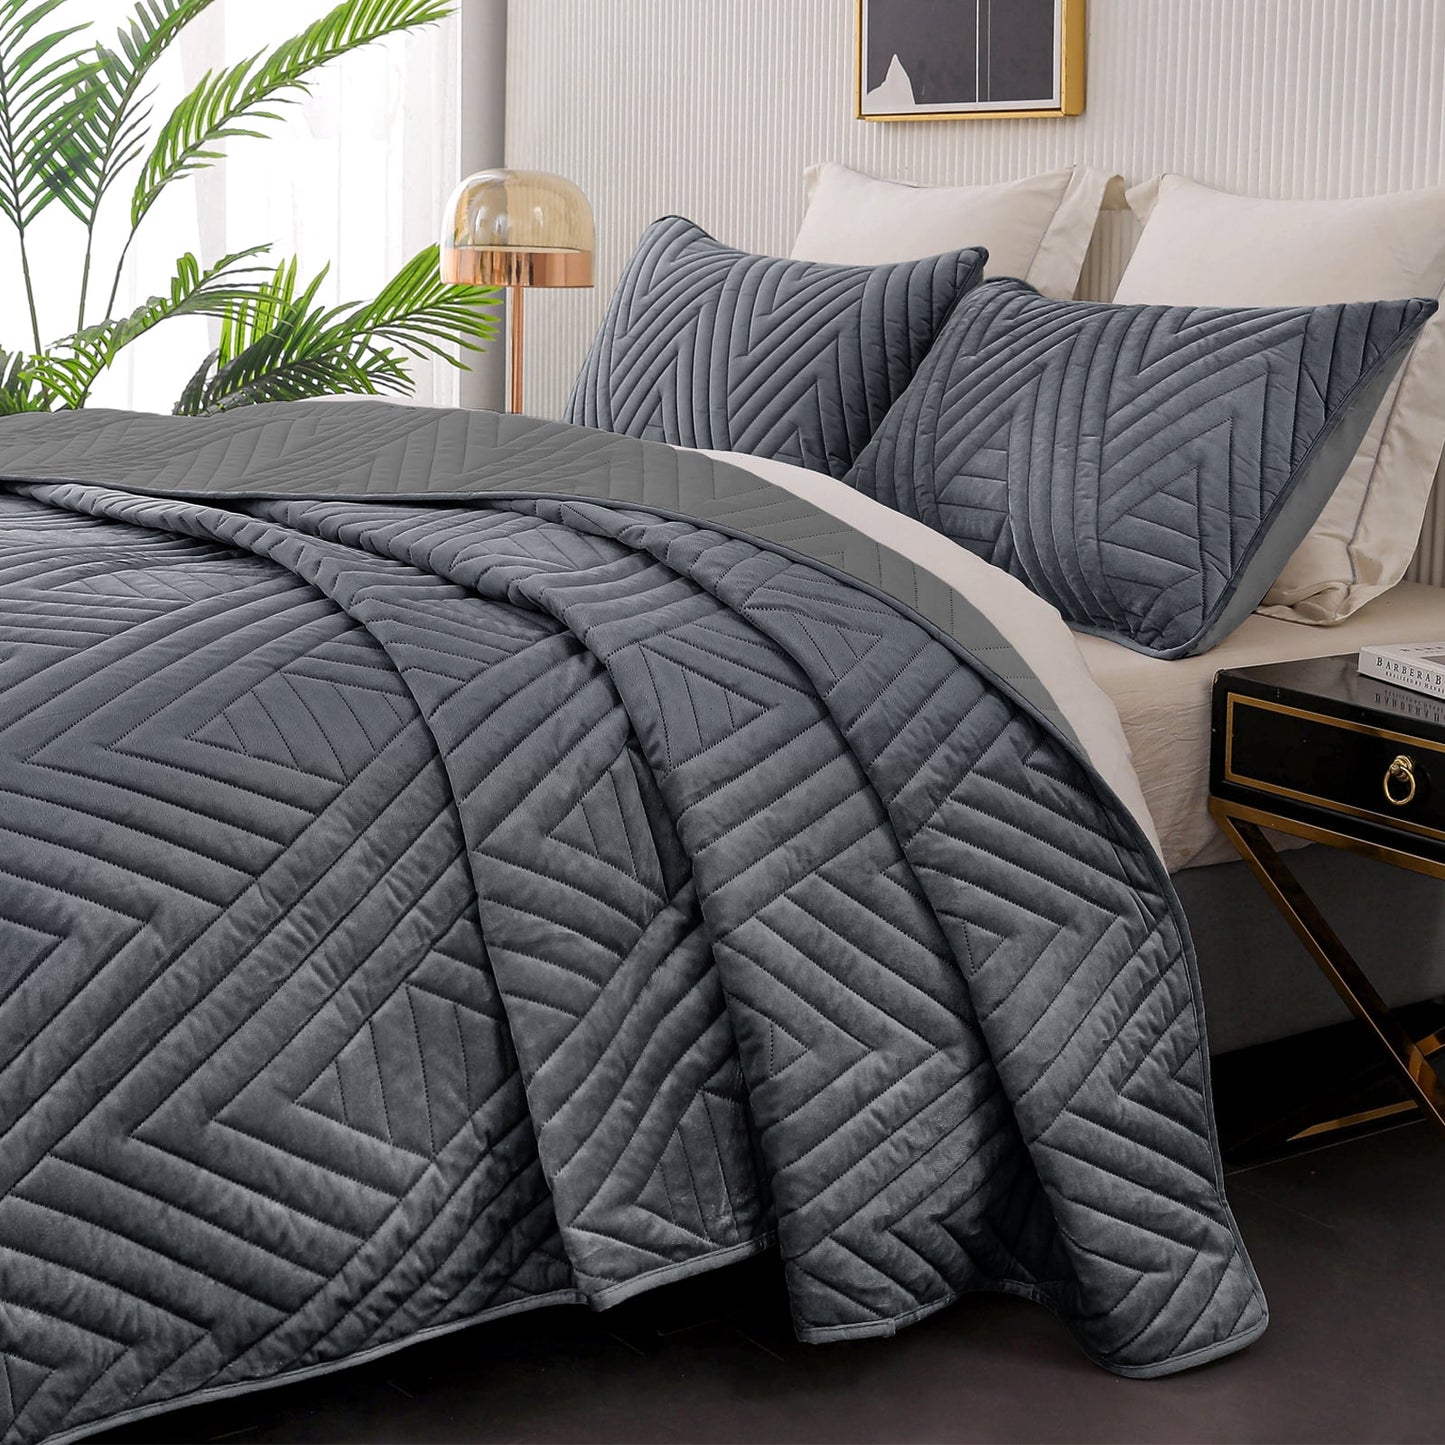 Exclusivo Mezcla Super Plush Velvet Quilt Twin Size with Pillow Sham, Luxury Soft Reversible 2 Piece Bedspreads Coverlet Comforter set for all seasons, Lightweight and Warm, Dark Grey